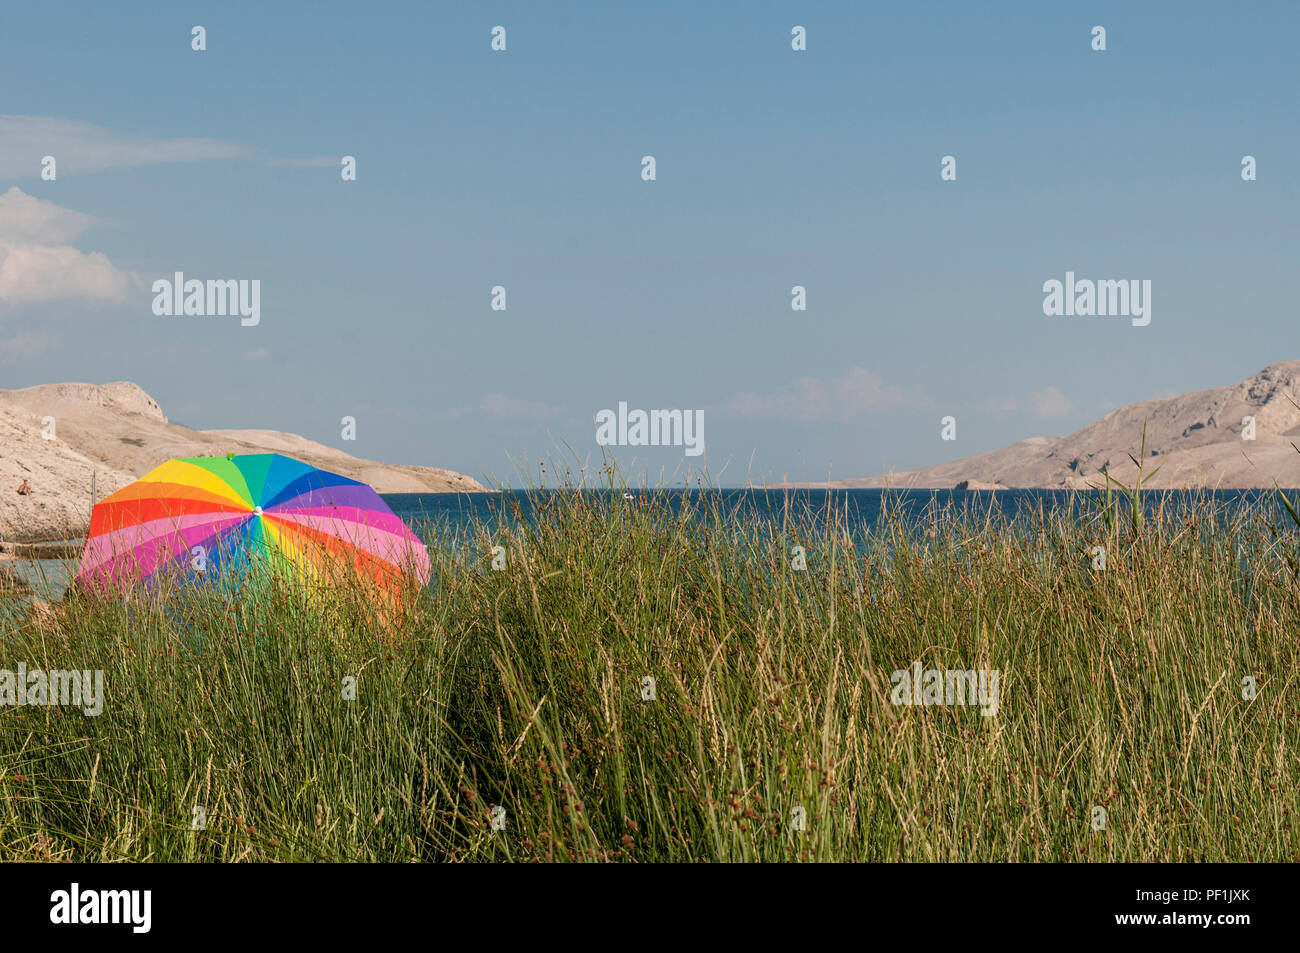 Pag Island, Croatia: rainbow beach umbrella in the grass at Rucica, pebbled beach nestled in a barren bay with green plants and desert landscape Stock Photo